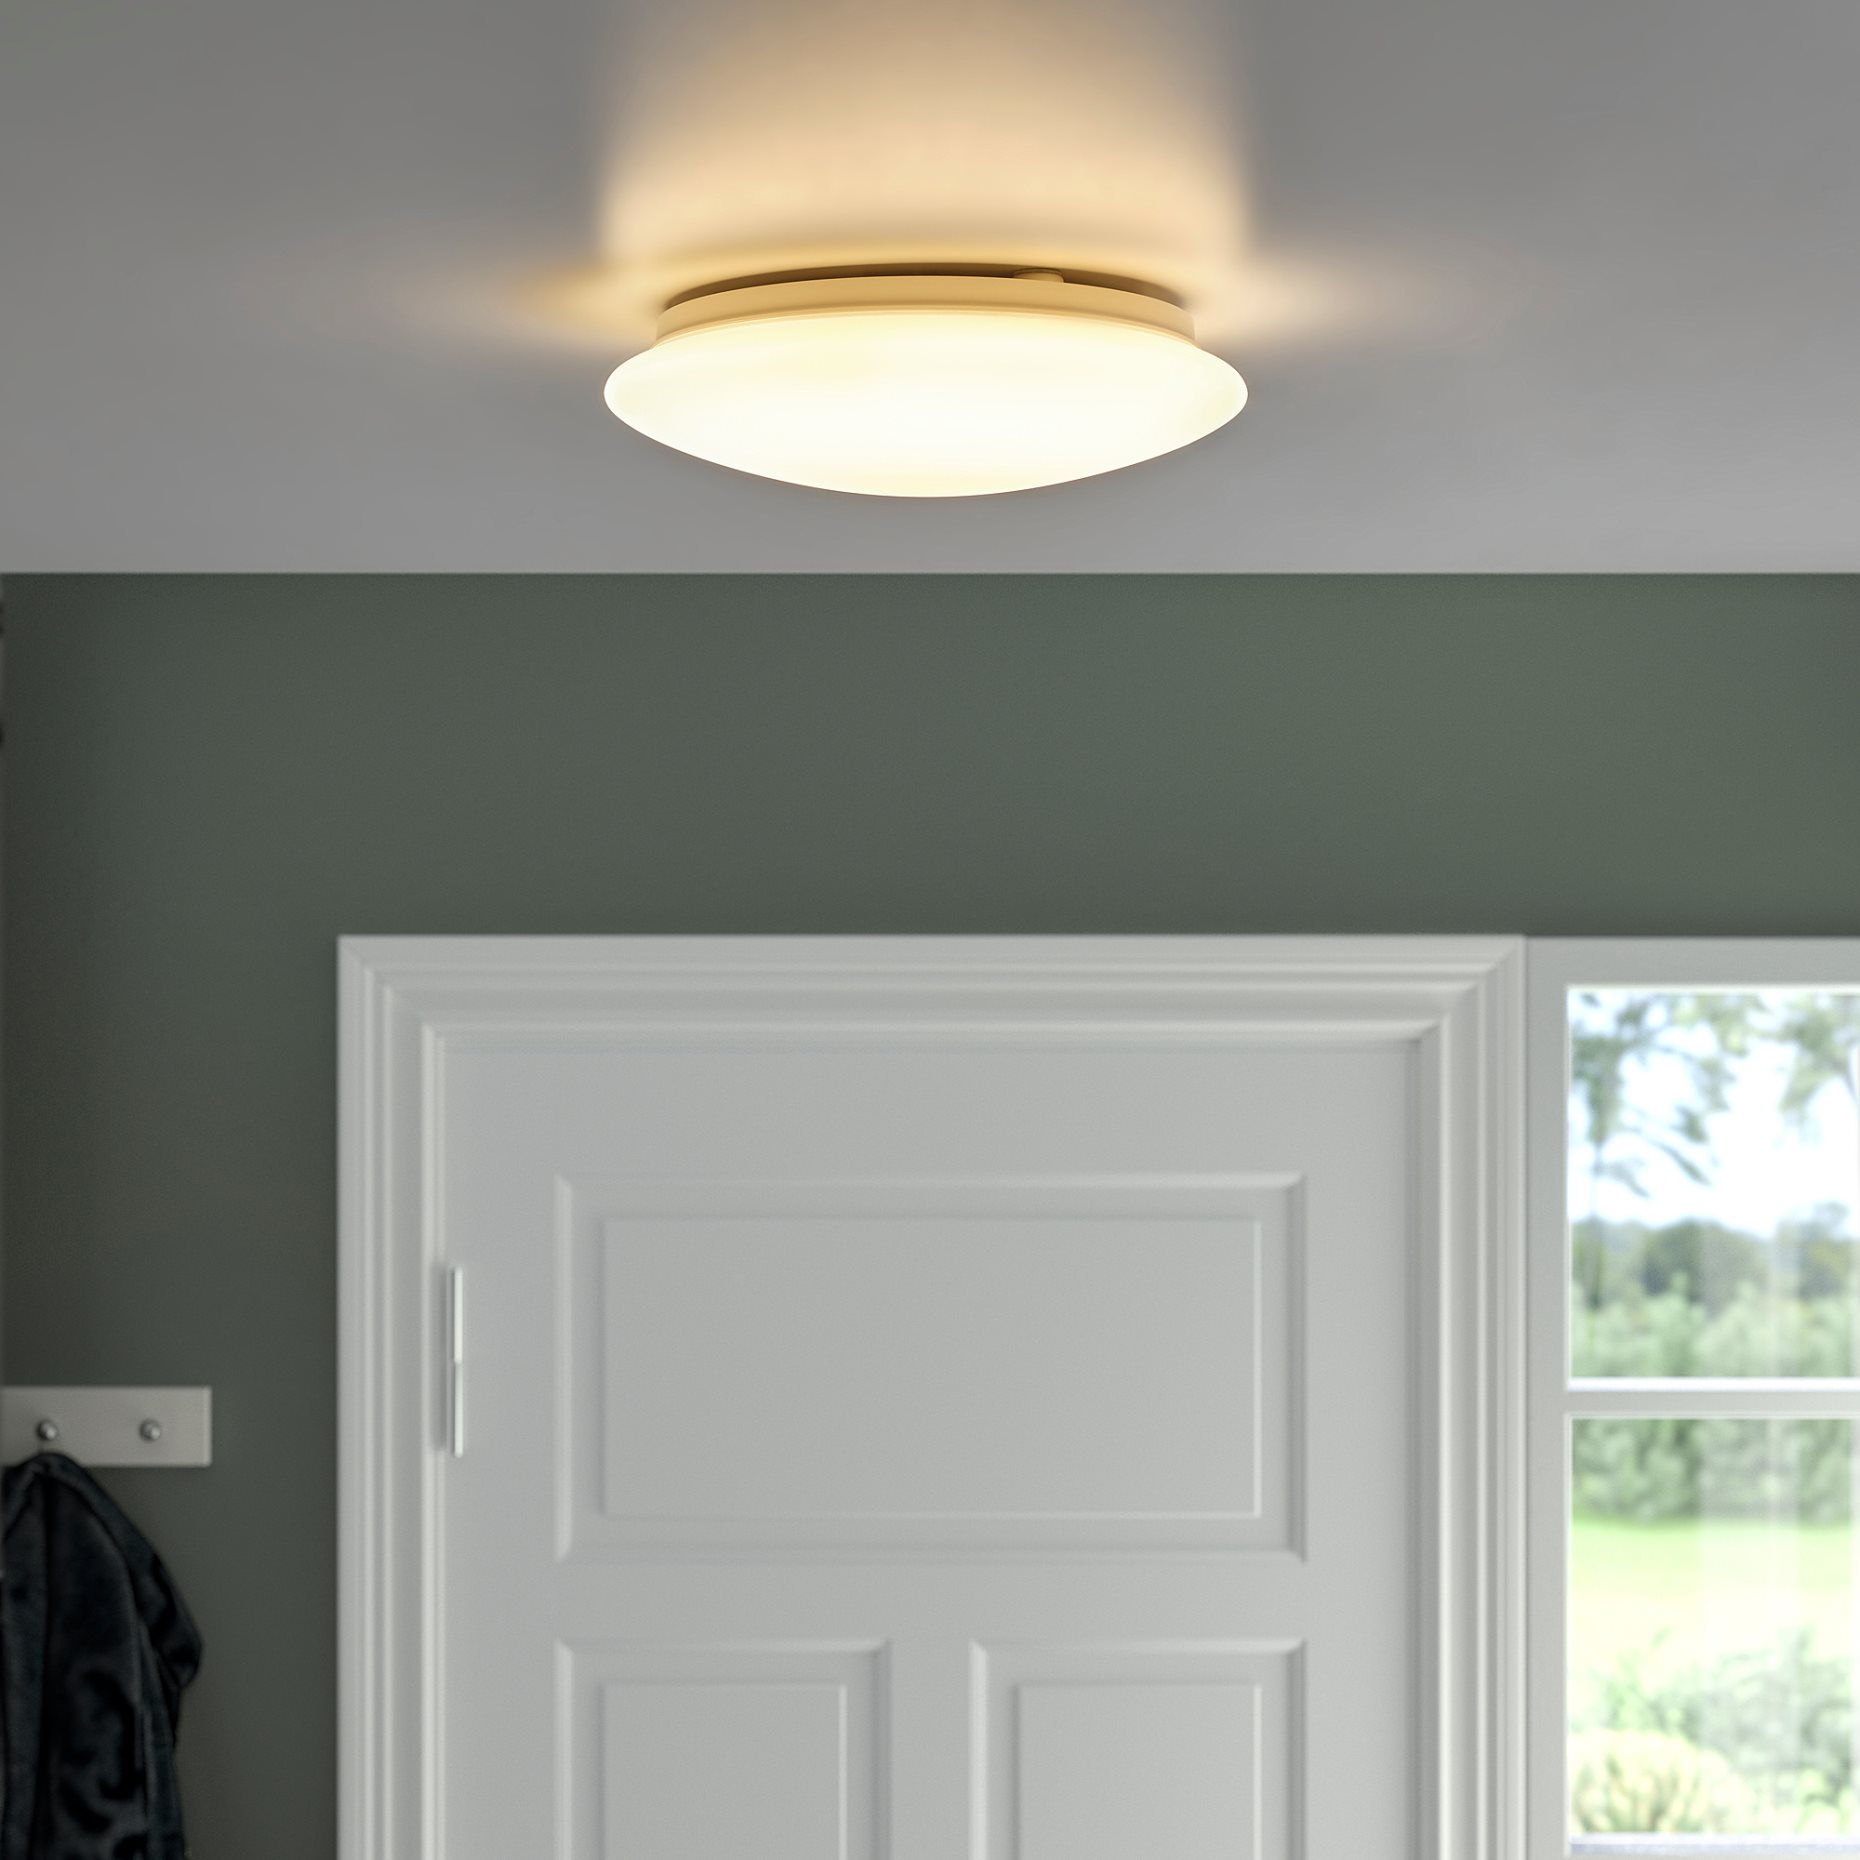 BARLAST, ceiling/wall lamp with built-in LED light source, 25 cm, 005.259.08